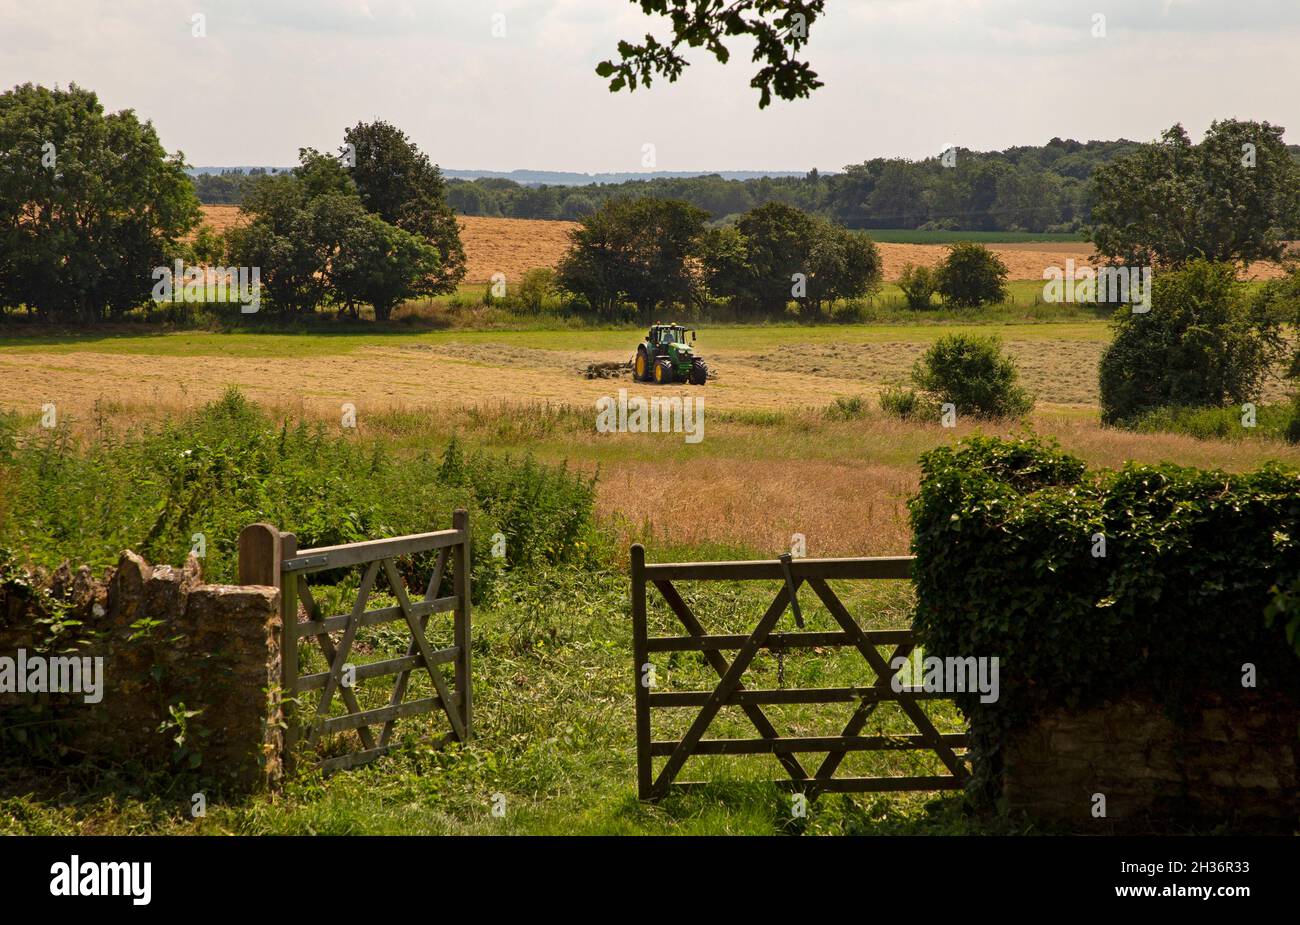 Tractor in field drying hay in meadow,oxfordshire,england Stock Photo